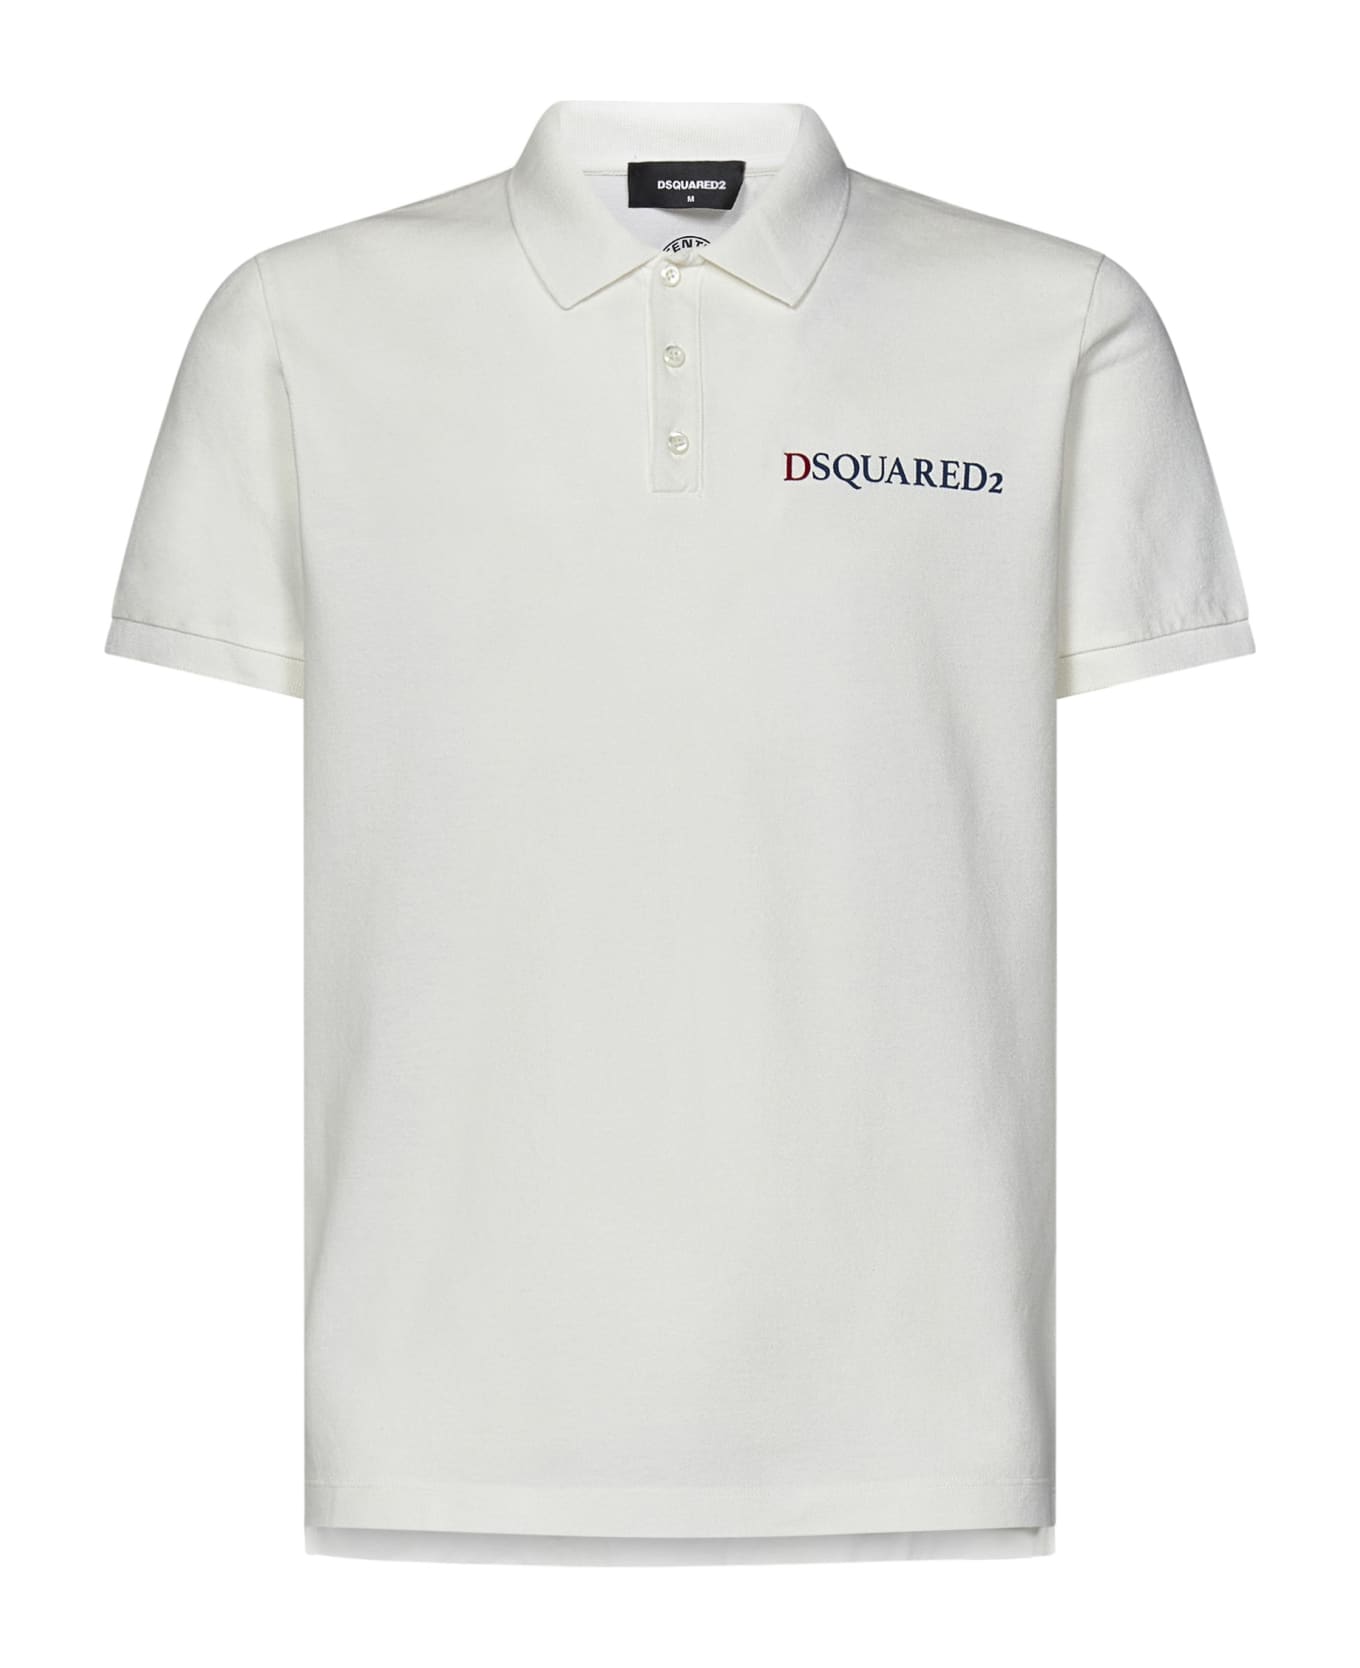 Dsquared2 Backdoor Access Tennis Fit Polo Shirt - White